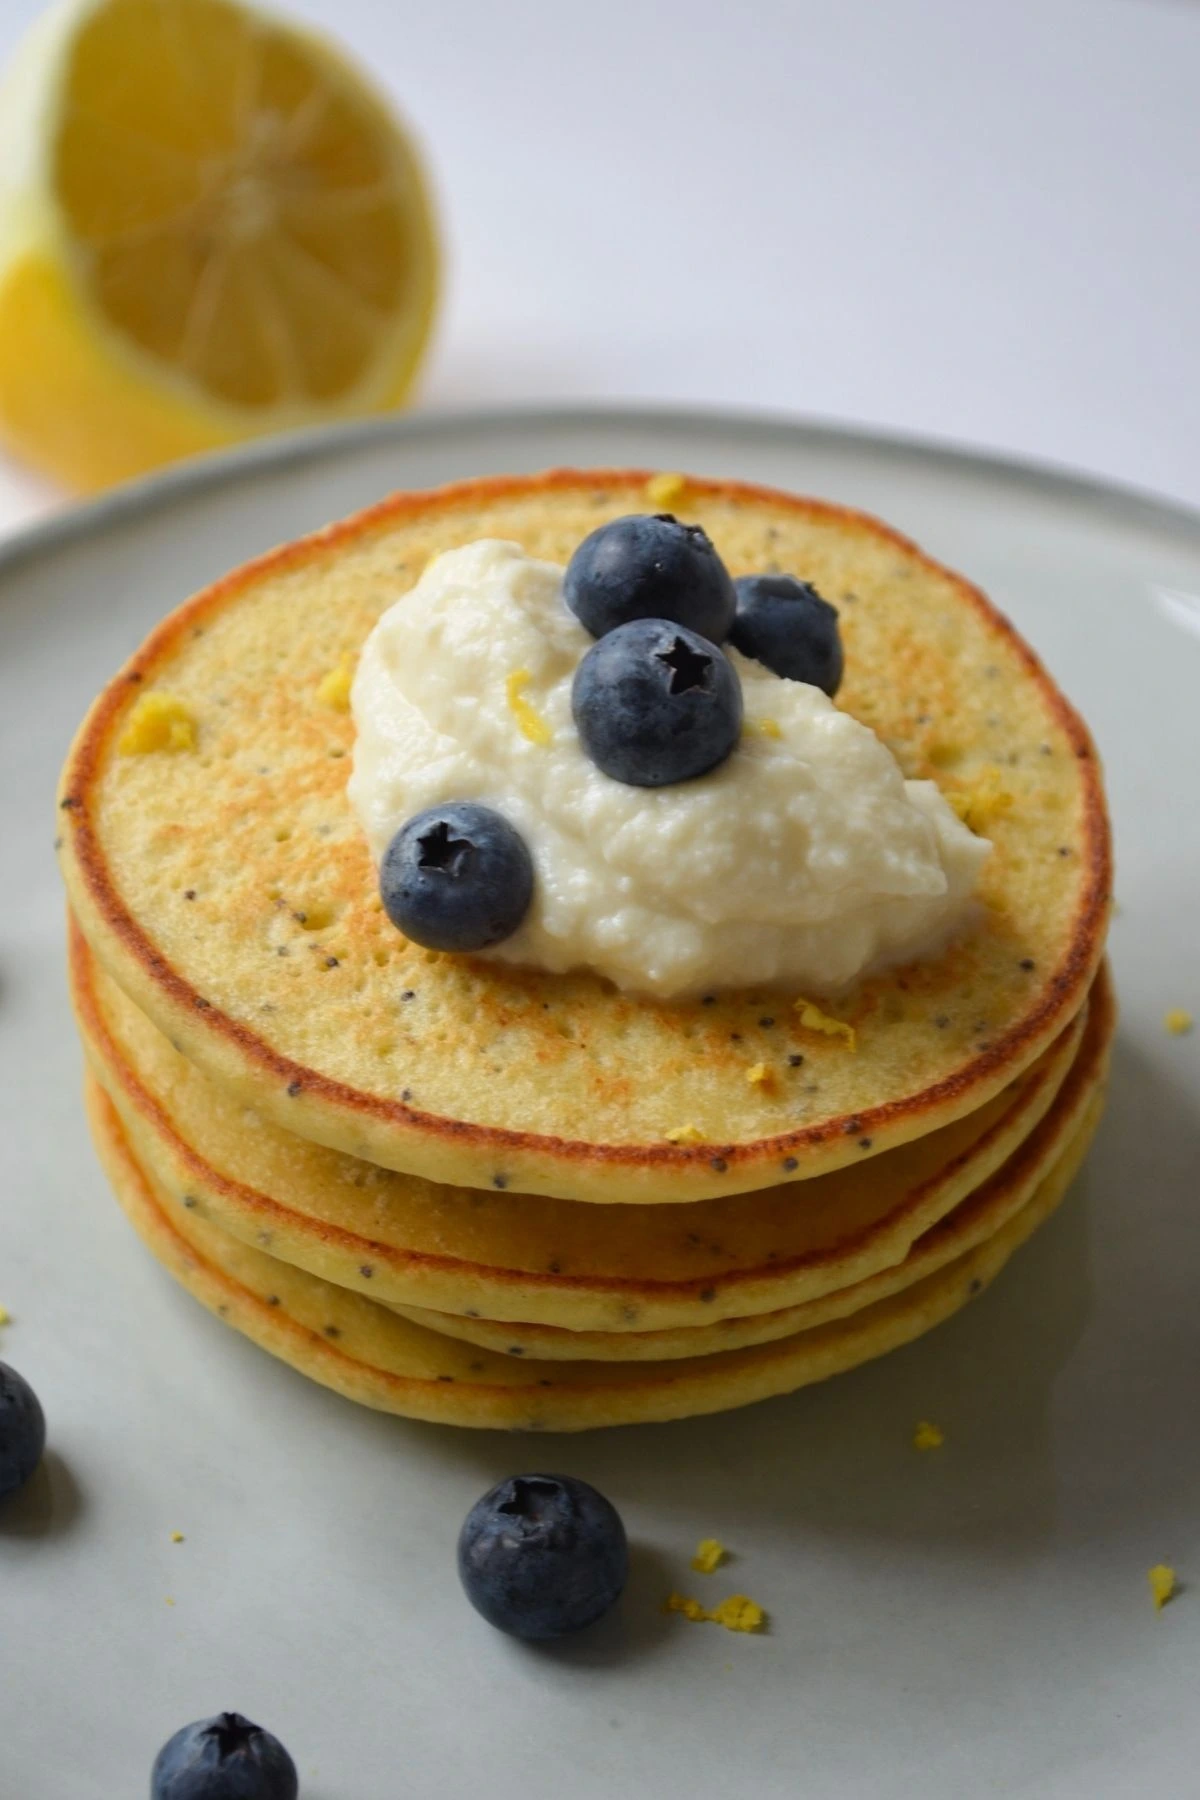 Lemon pancakes, topped with whipped ricotta and blueberries